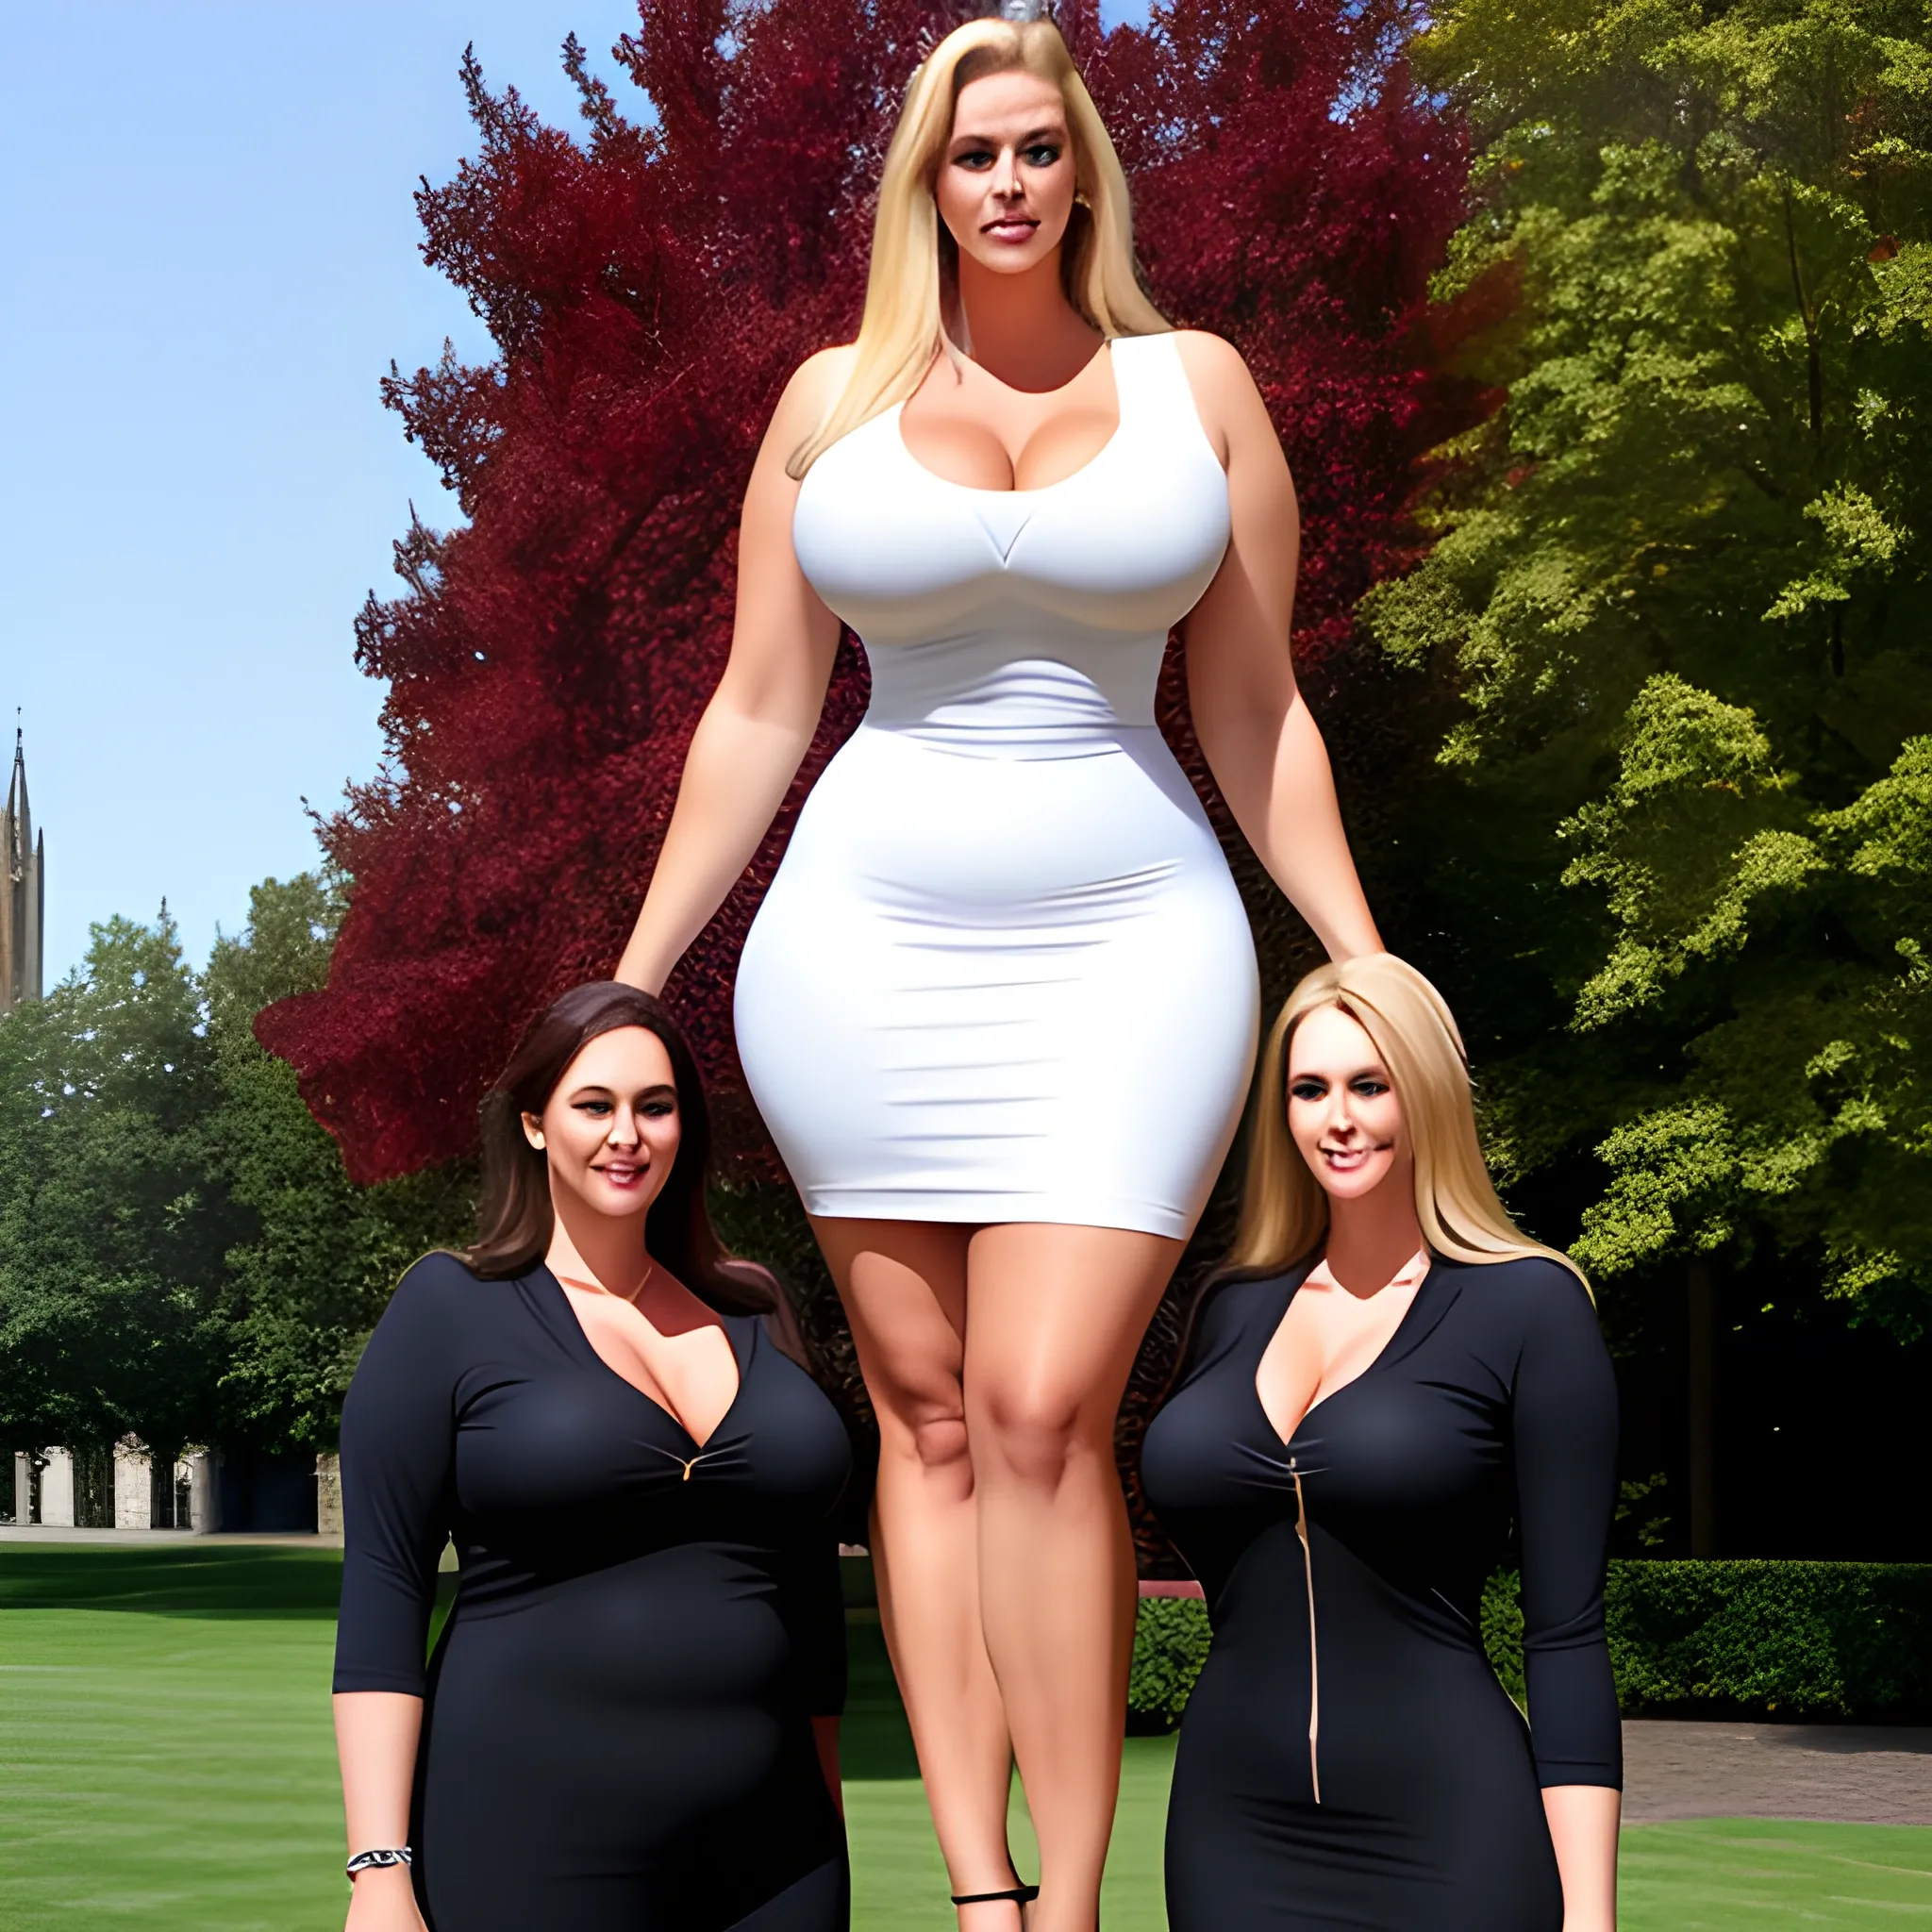 huge and very tall, not quite plus size, friendly beautiful blon